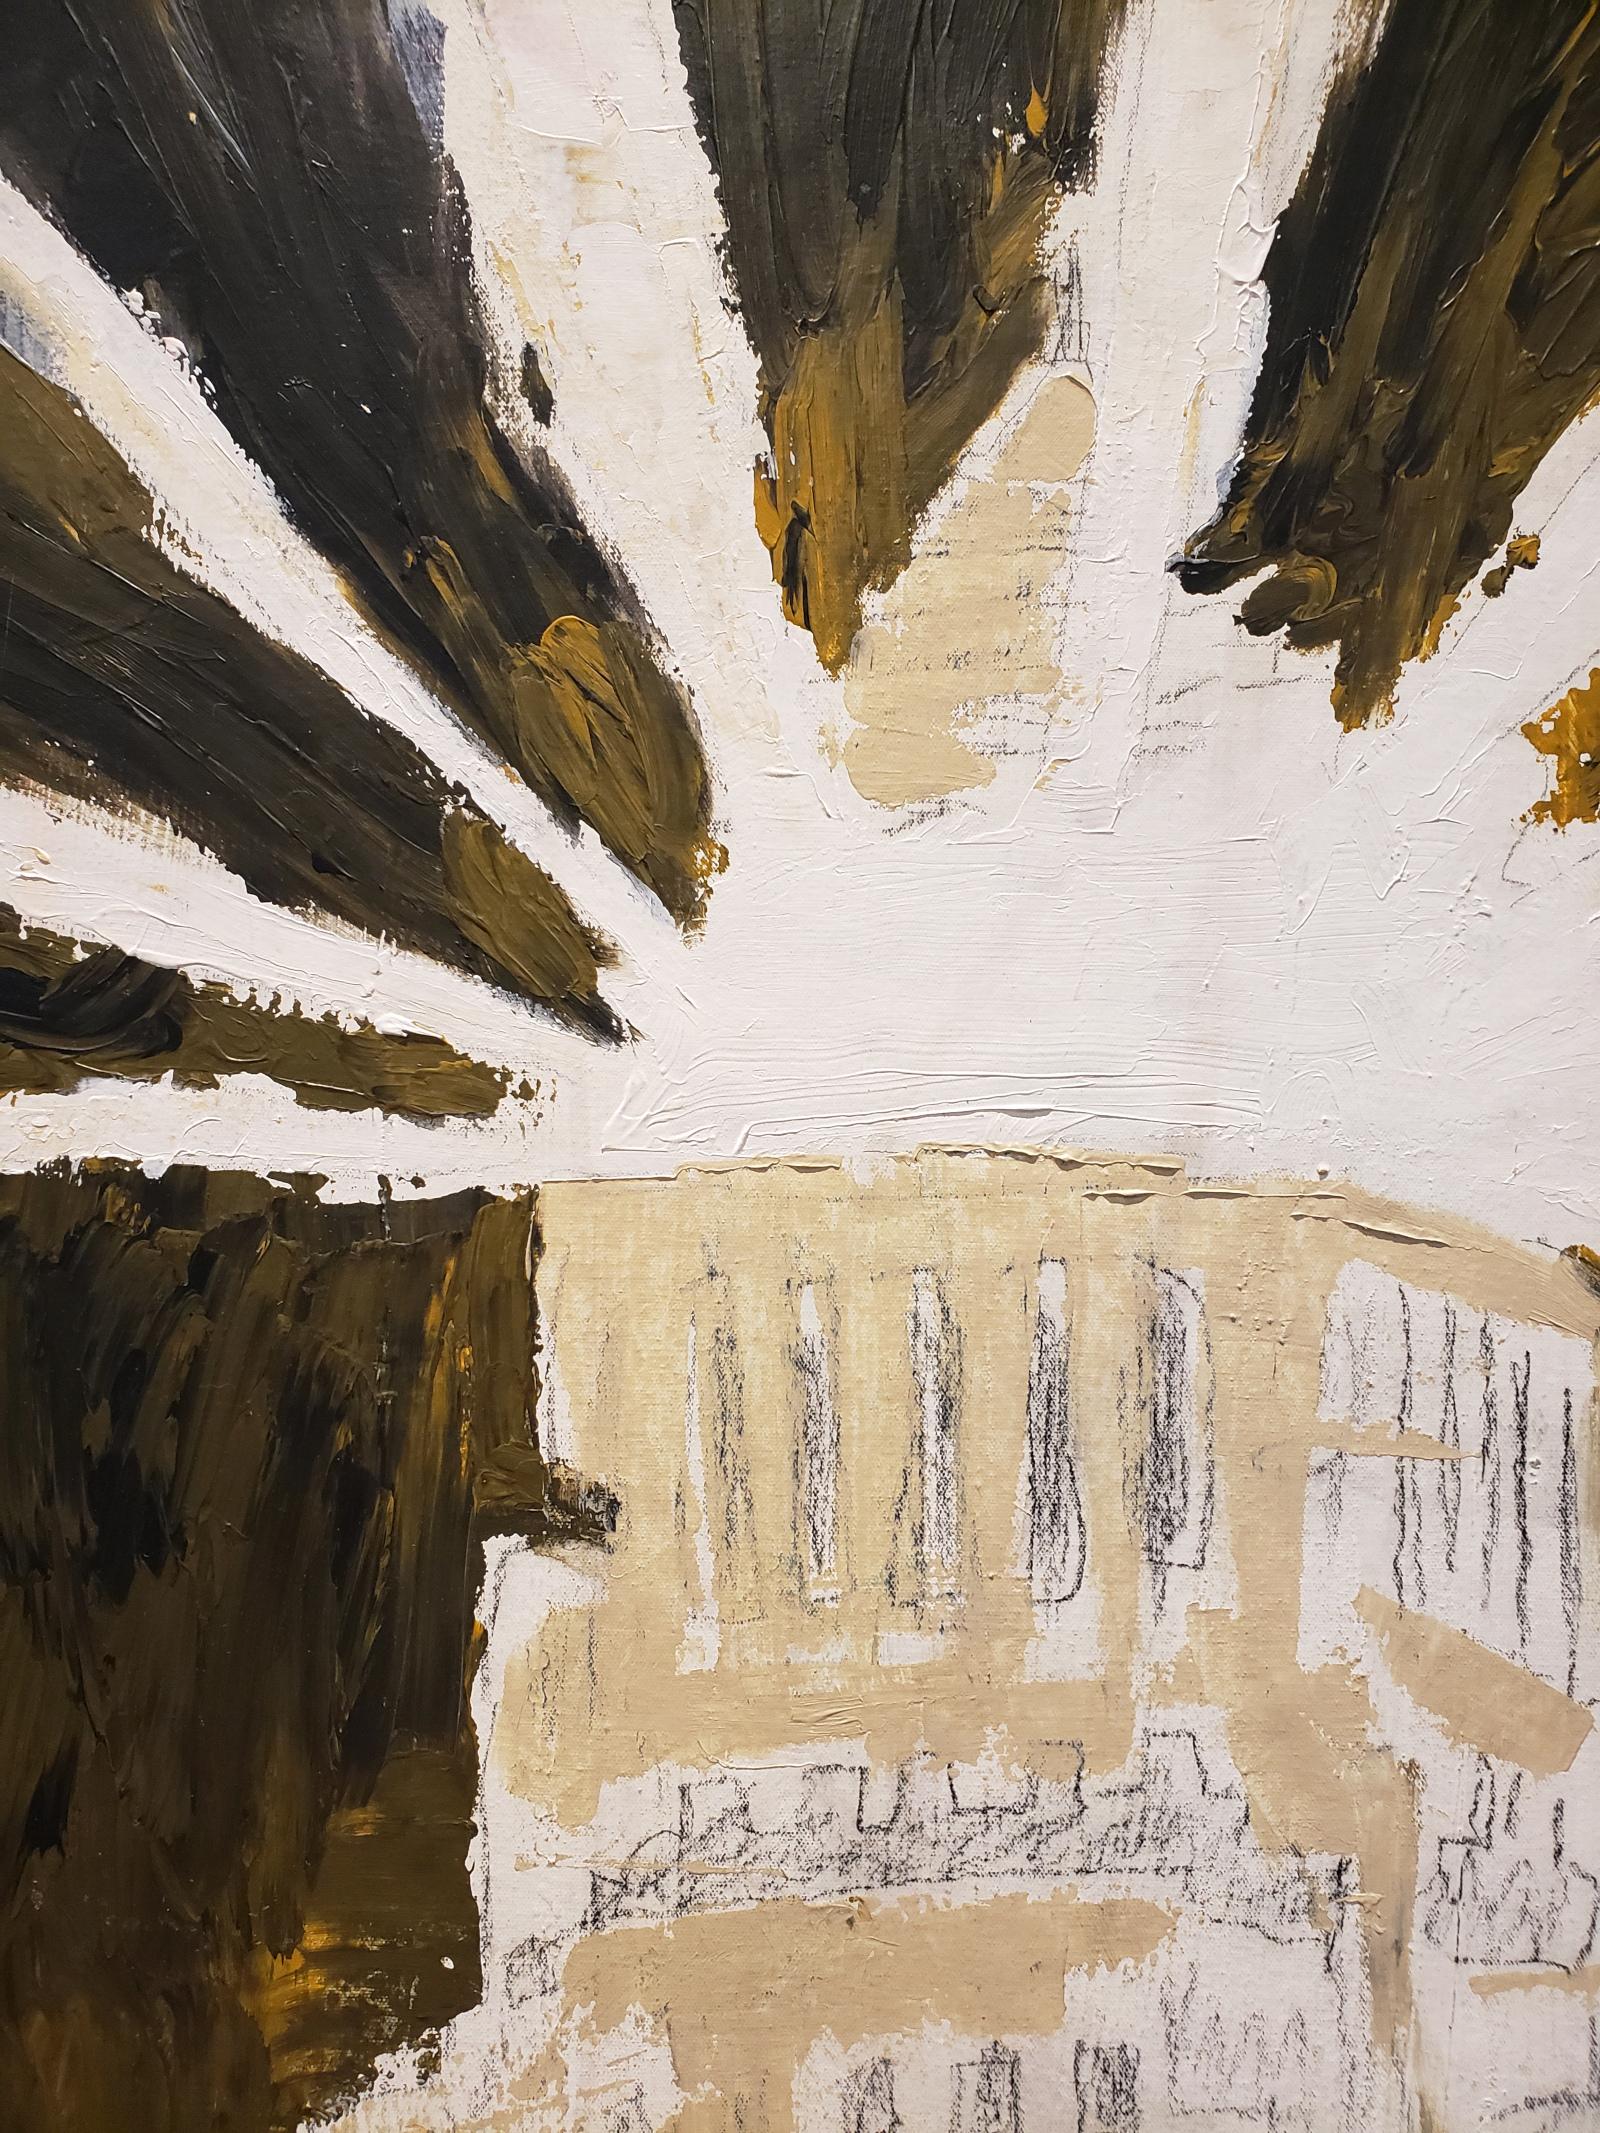 Painting inspired by a 1936 photograph of Los Angeles city hall by artist Lionel Lamy. Rough pencil sketch accentuated by rich, thick mix of tan green and black paint. Acrylic and pencil on canvas. Measures: 26